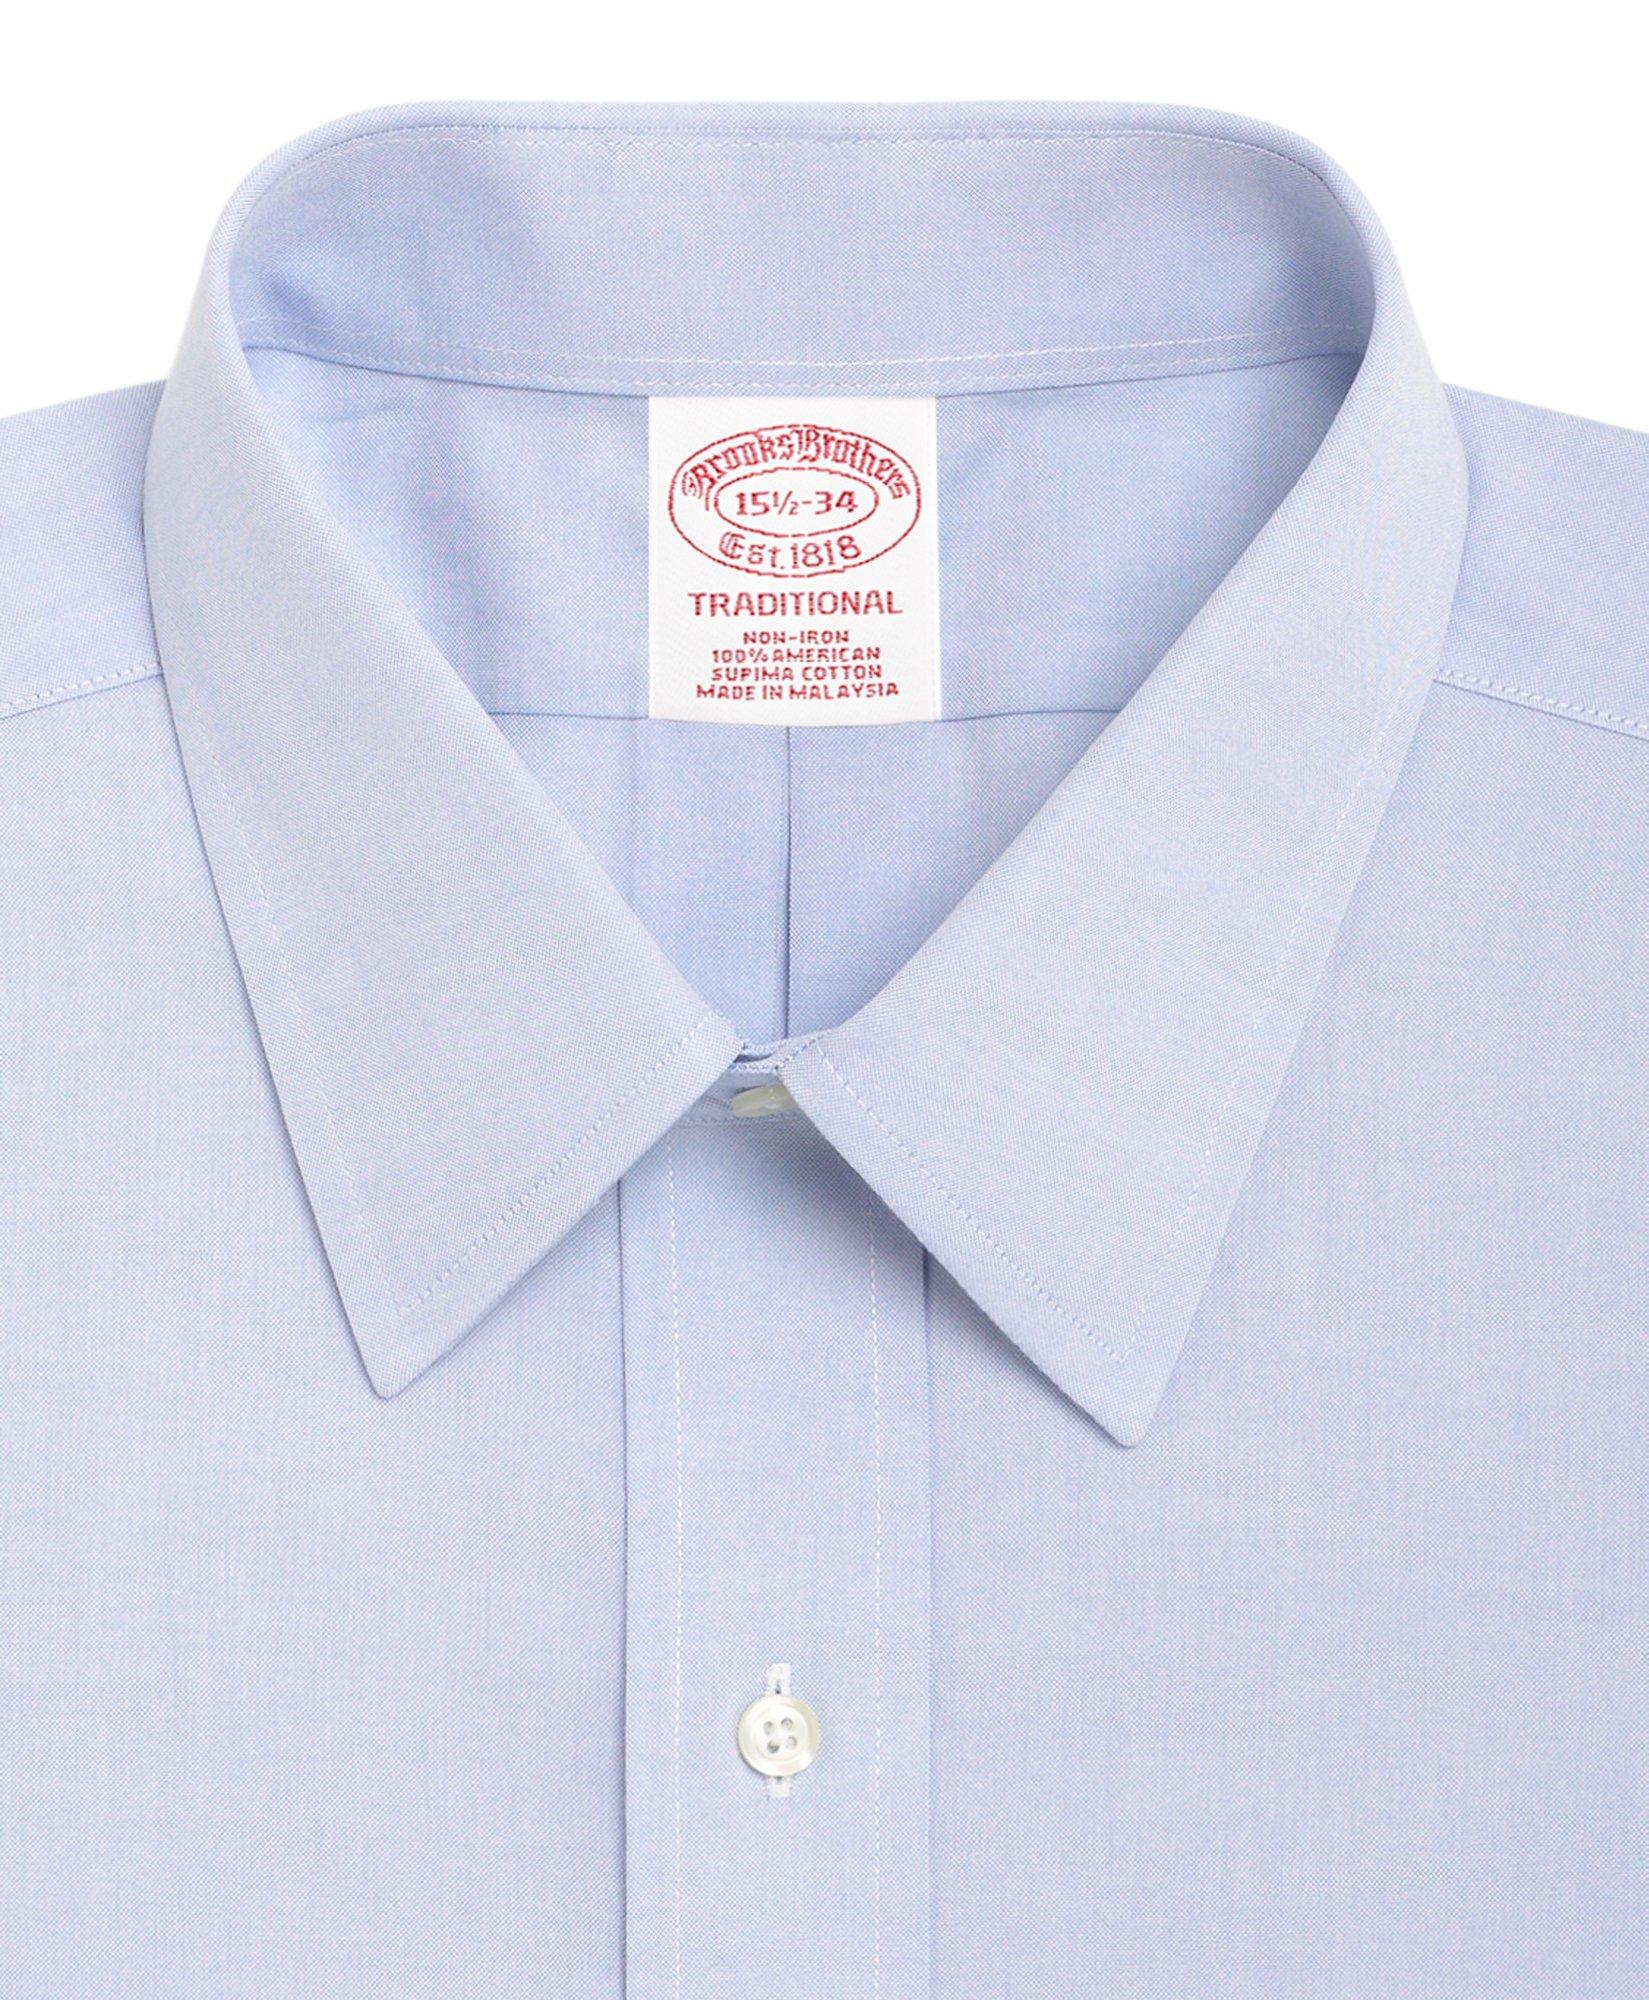 Men's Non-Iron Traditional Fit Point Collar Dress Shirt